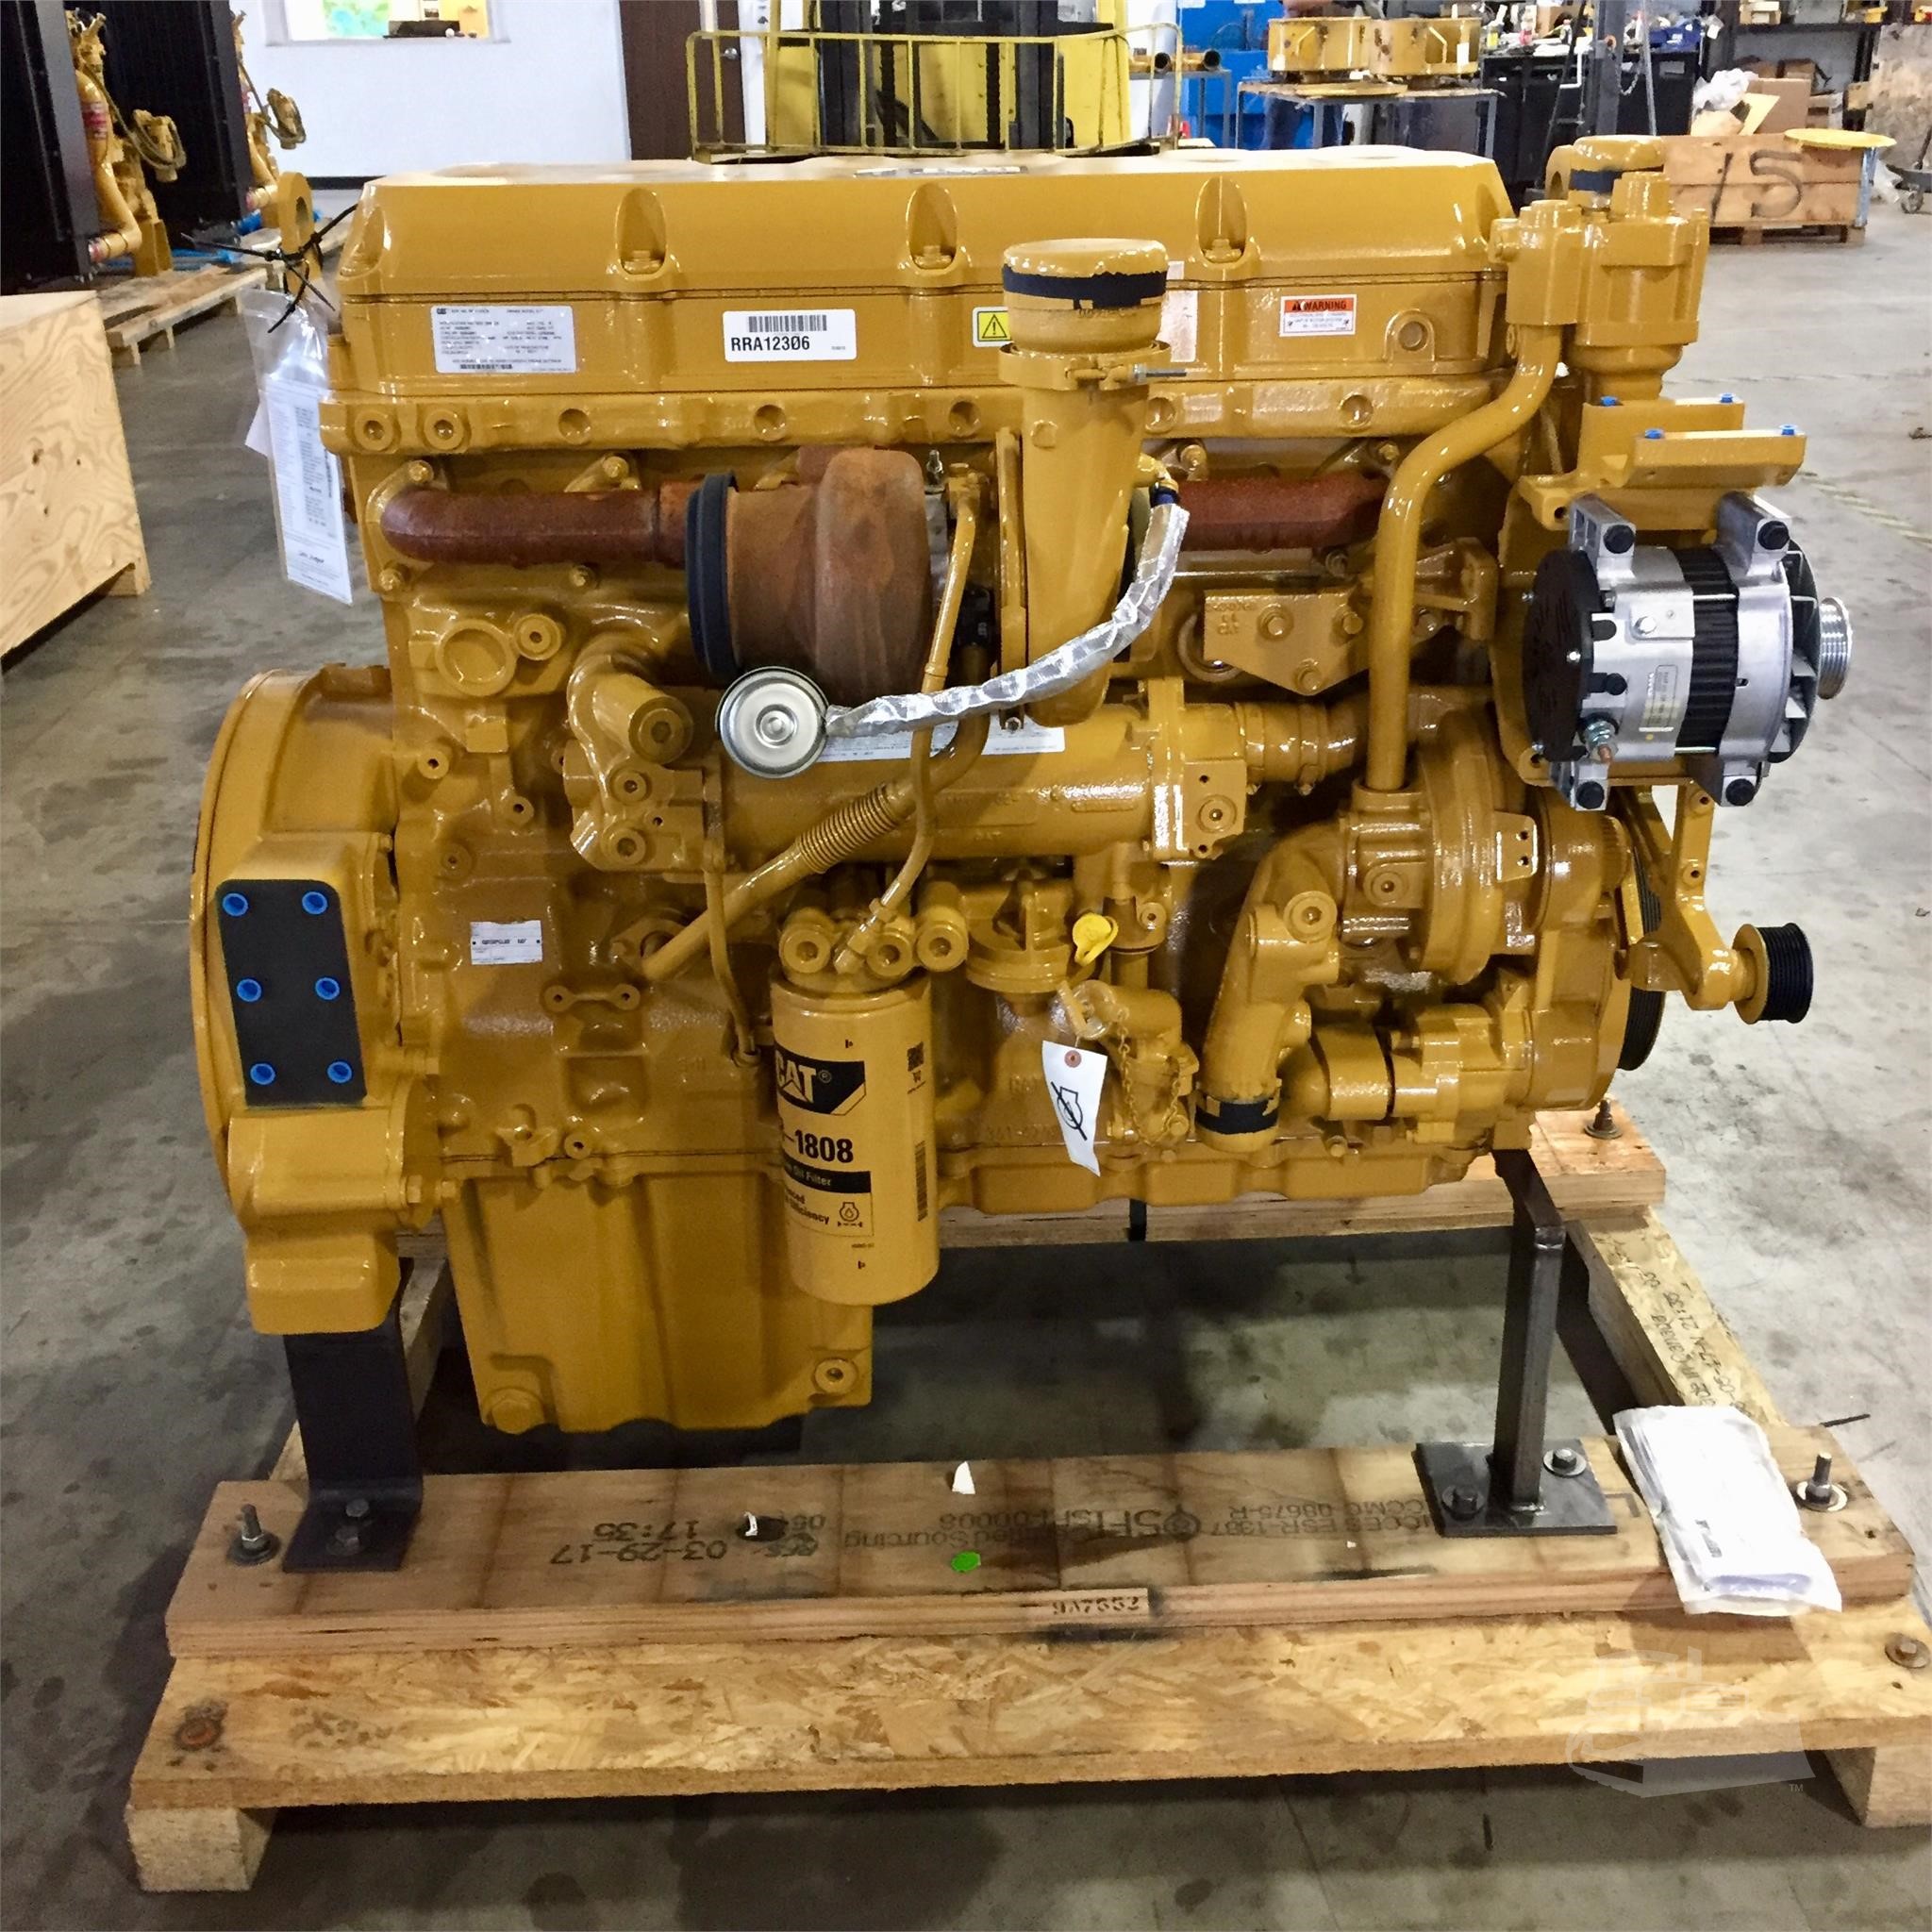 2017 CAT C13 Engine For Sale In Houston, Texas